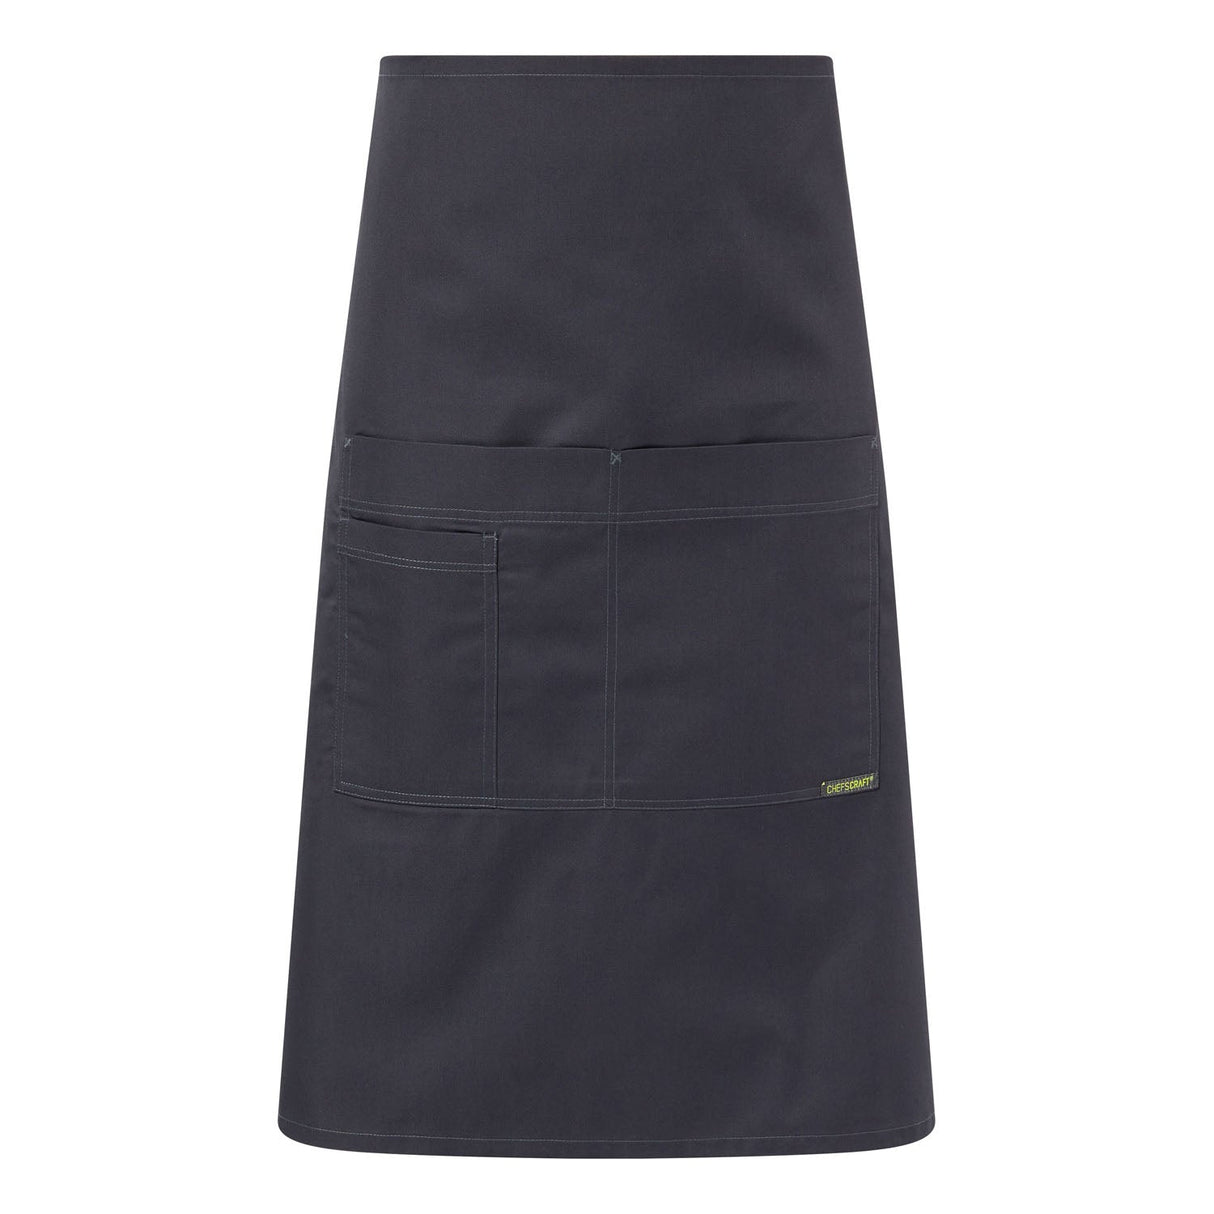 CA032 3/4 Apron With Pockets